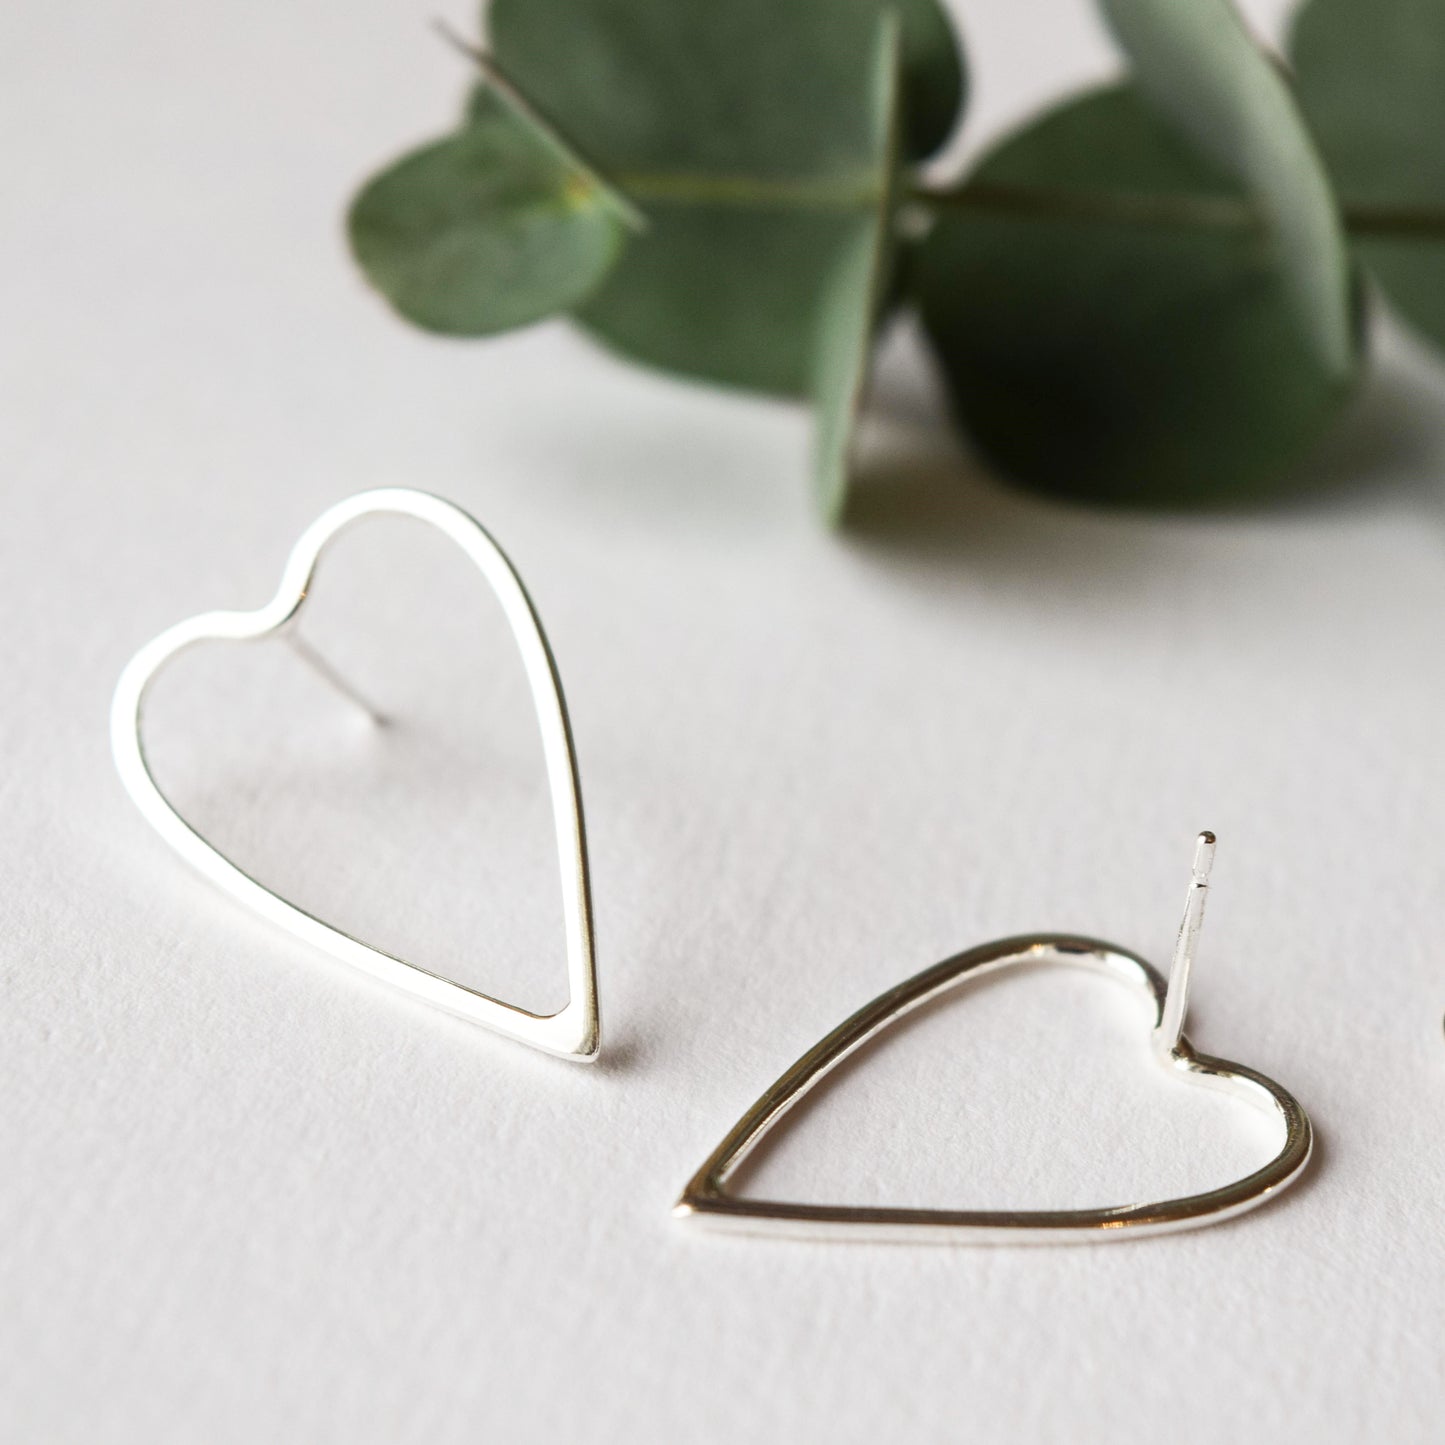 silver heart earrings close up on white background